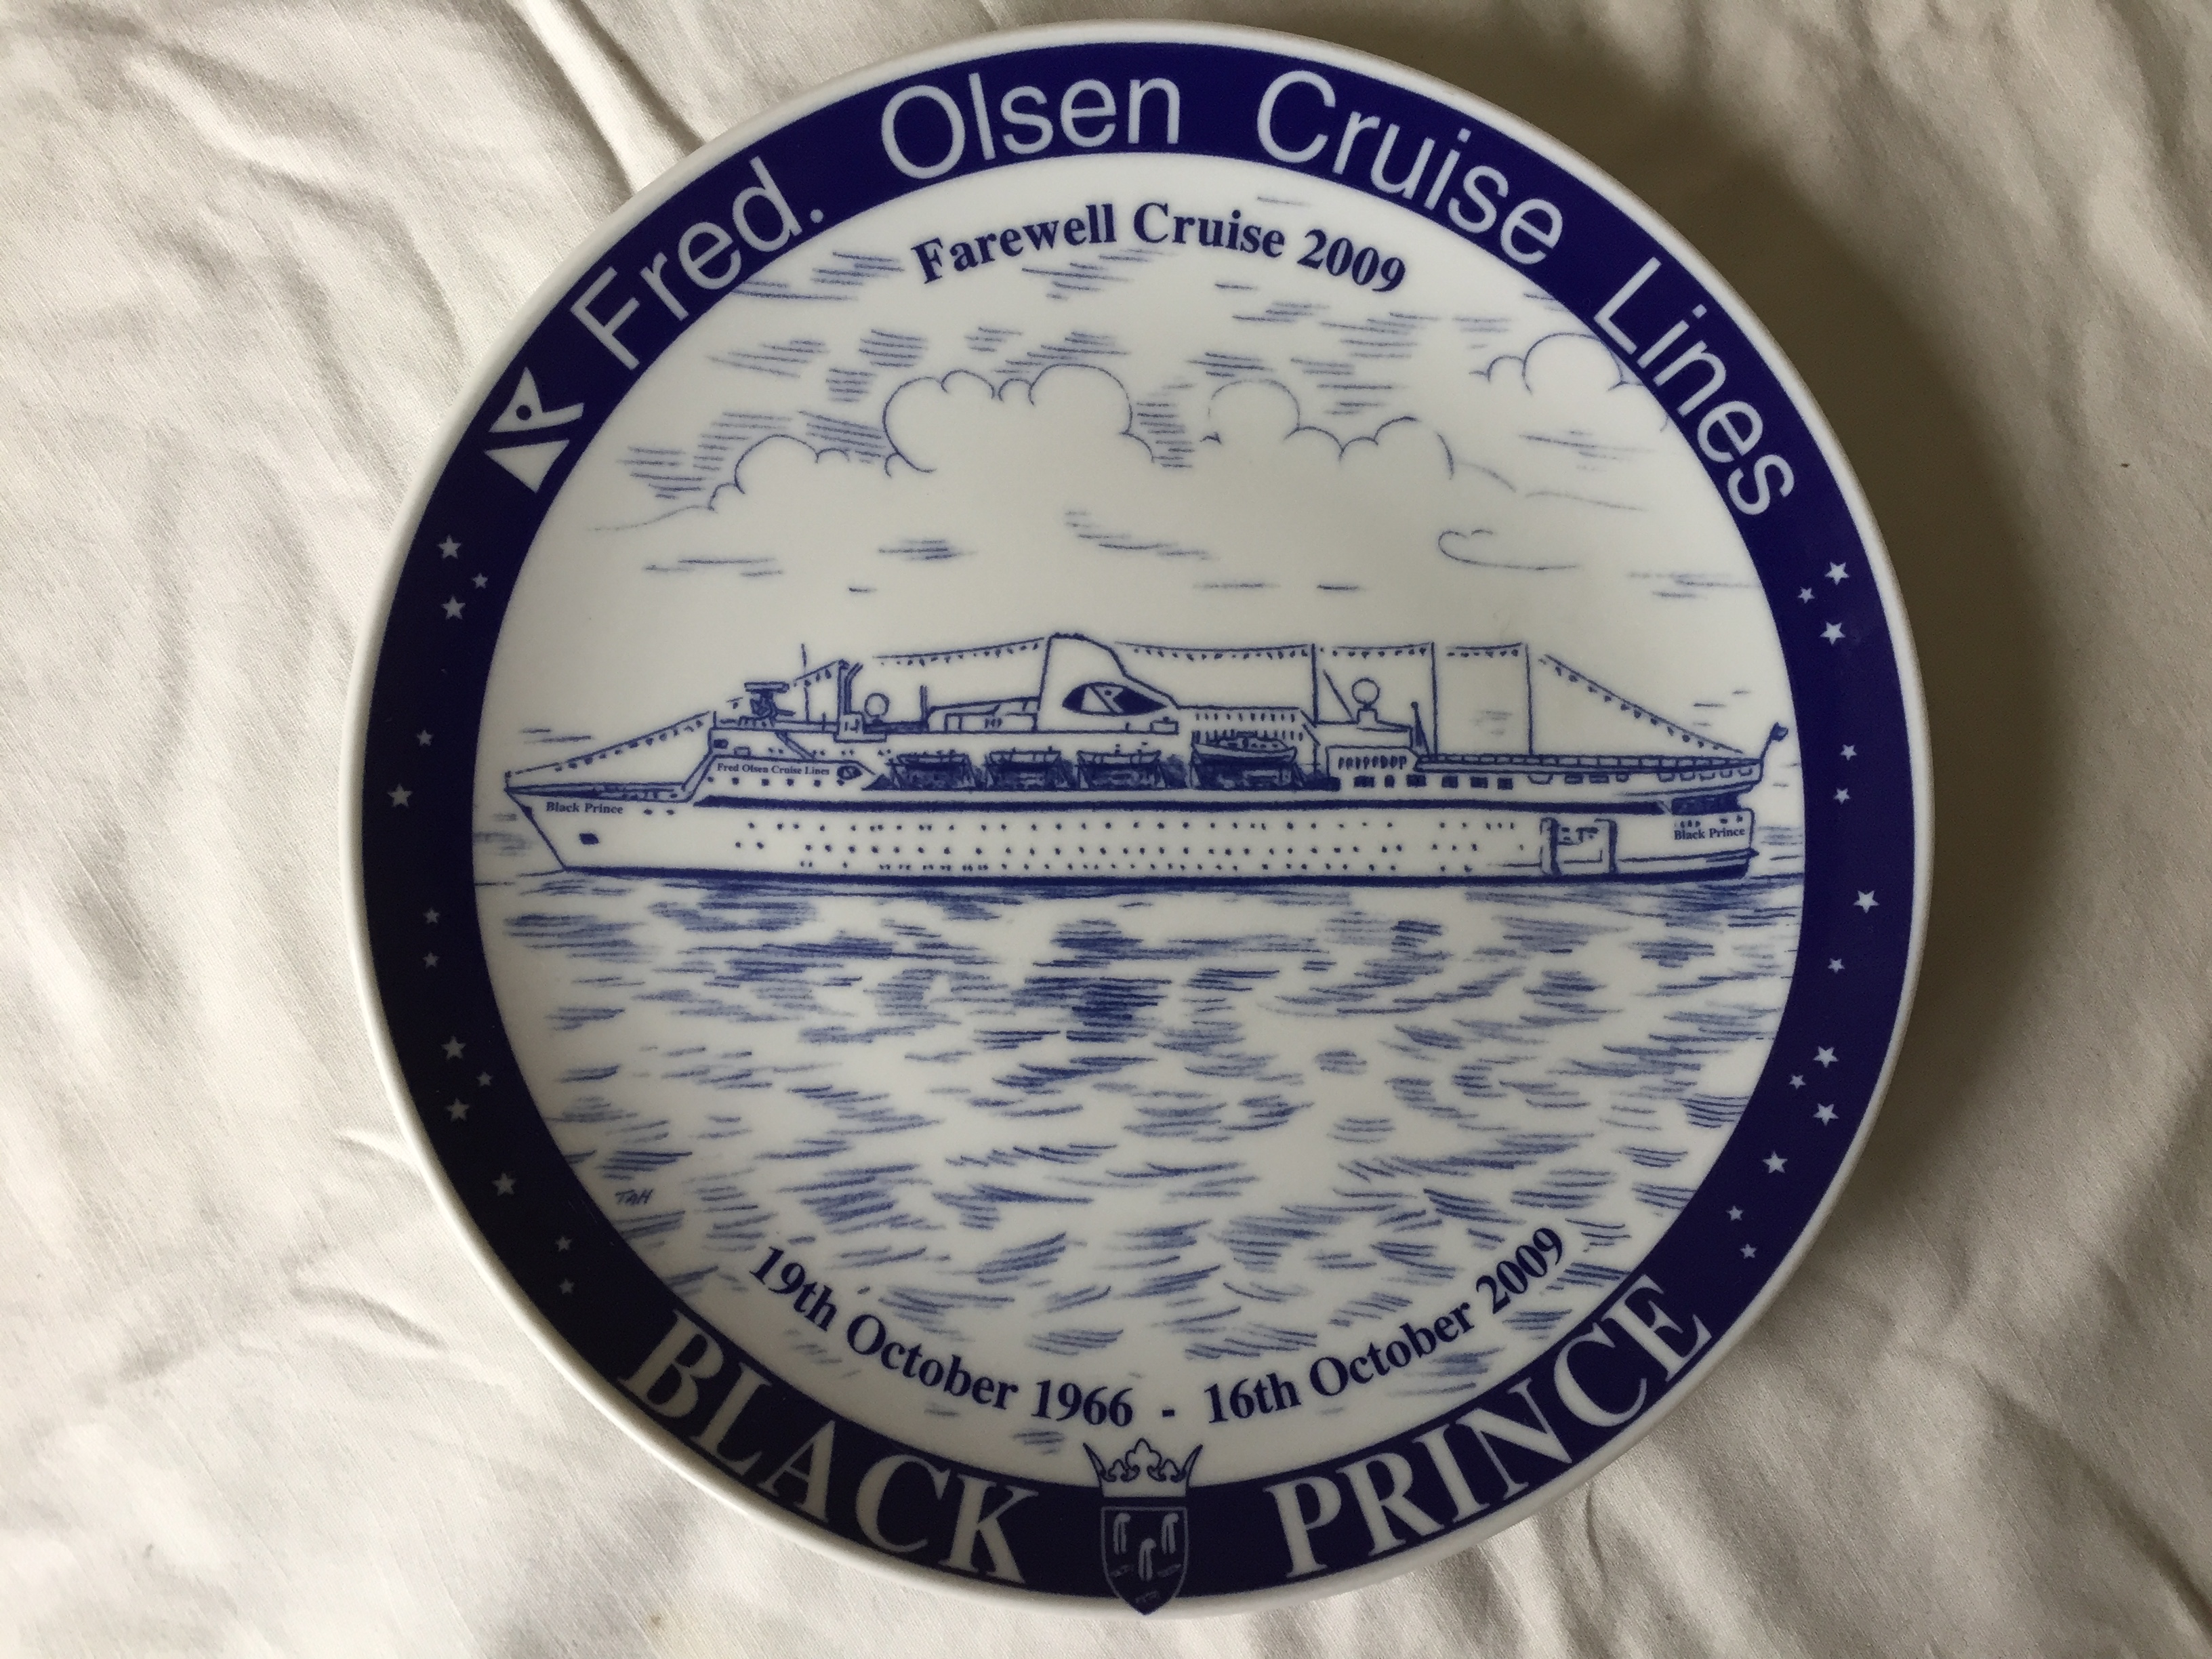 FAREWELL CRUISE PLATE FROM THE FRED OLSEN LINES VESSEL THE BLACK PRINCE